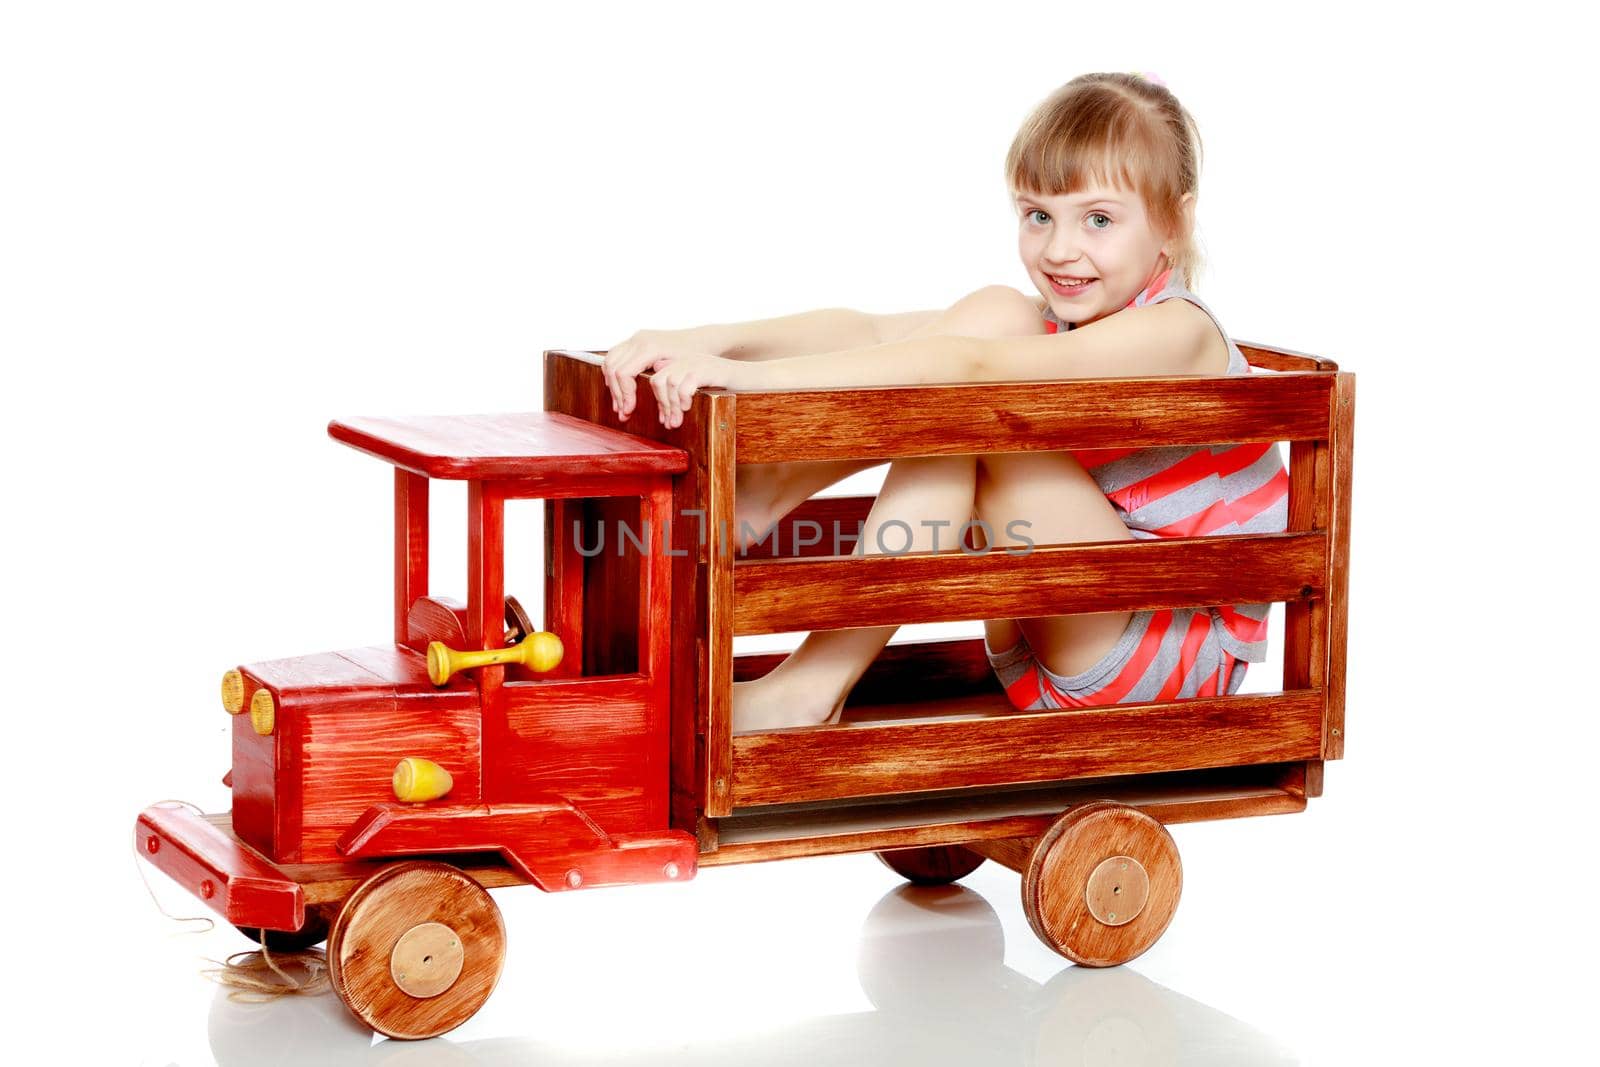 The girl is sitting on a large toy wooden car. by kolesnikov_studio